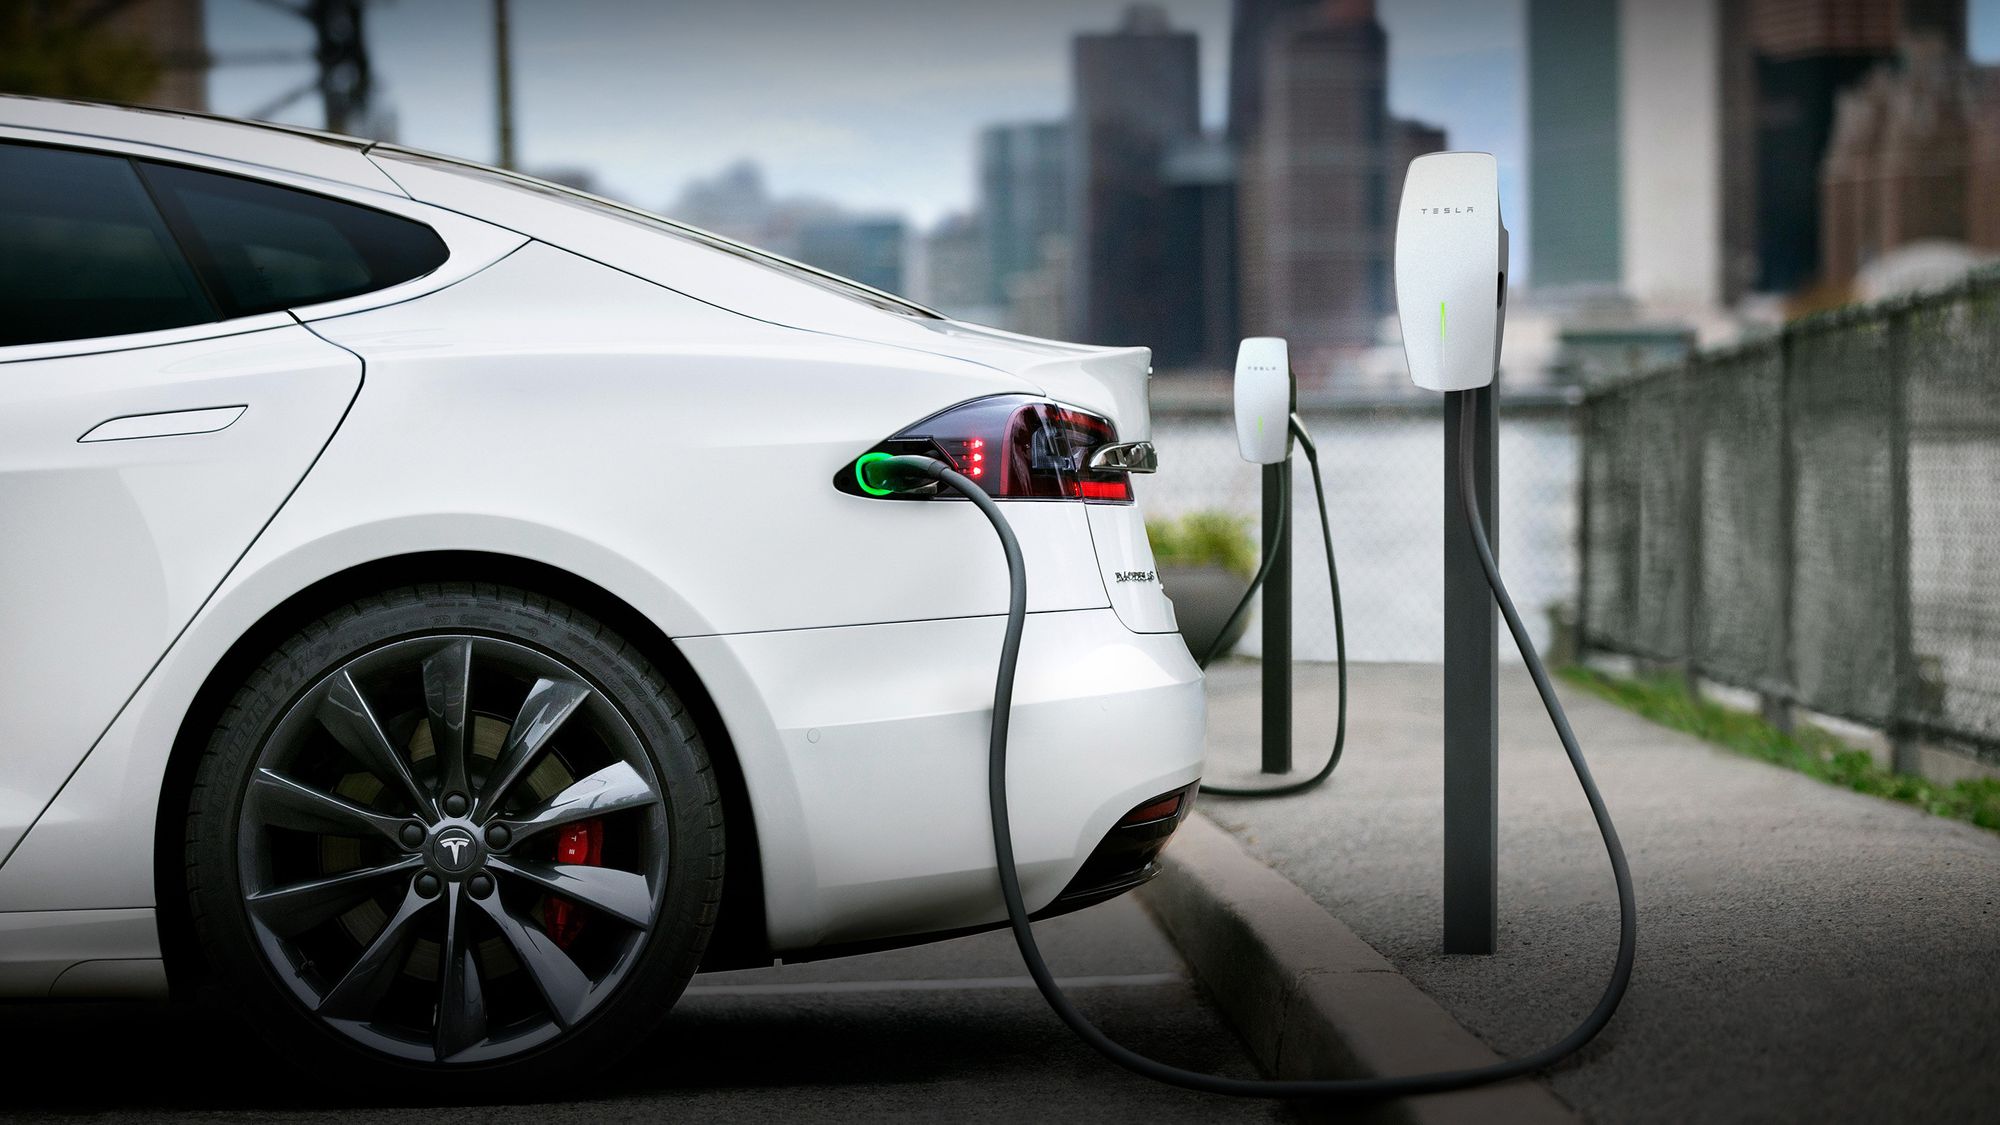 How Long Does It Take To Charge A Tesla?